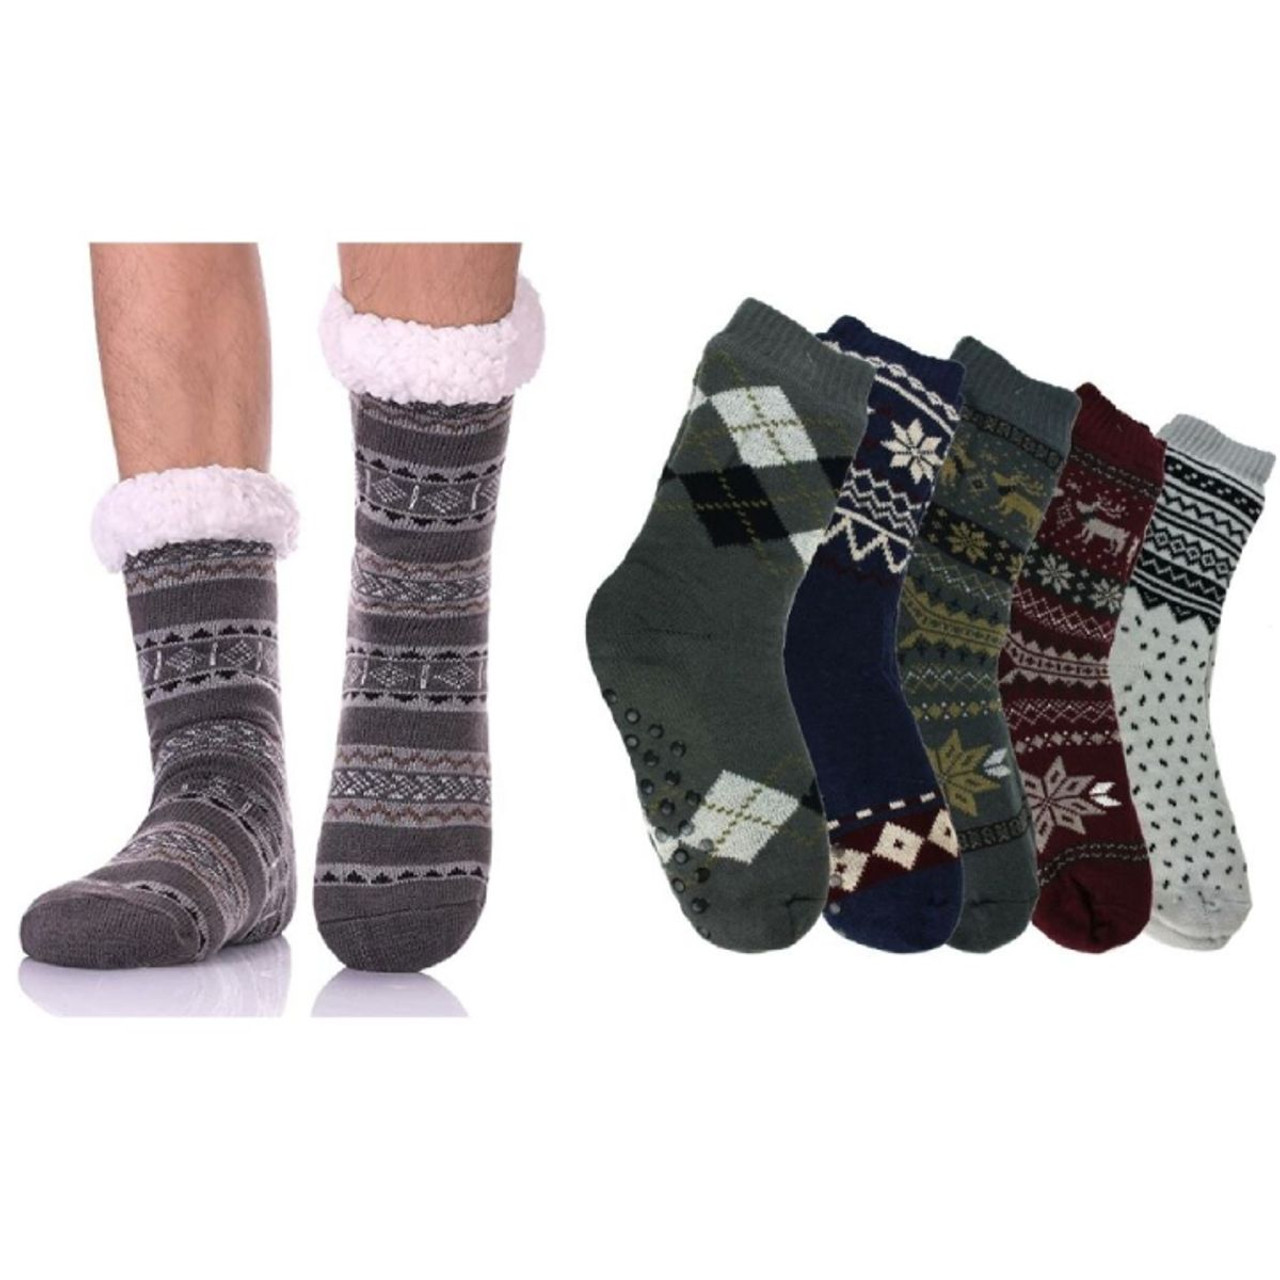 Men's Assorted Soft Fluffy Sherpa Slipper Socks (3-Pairs) product image